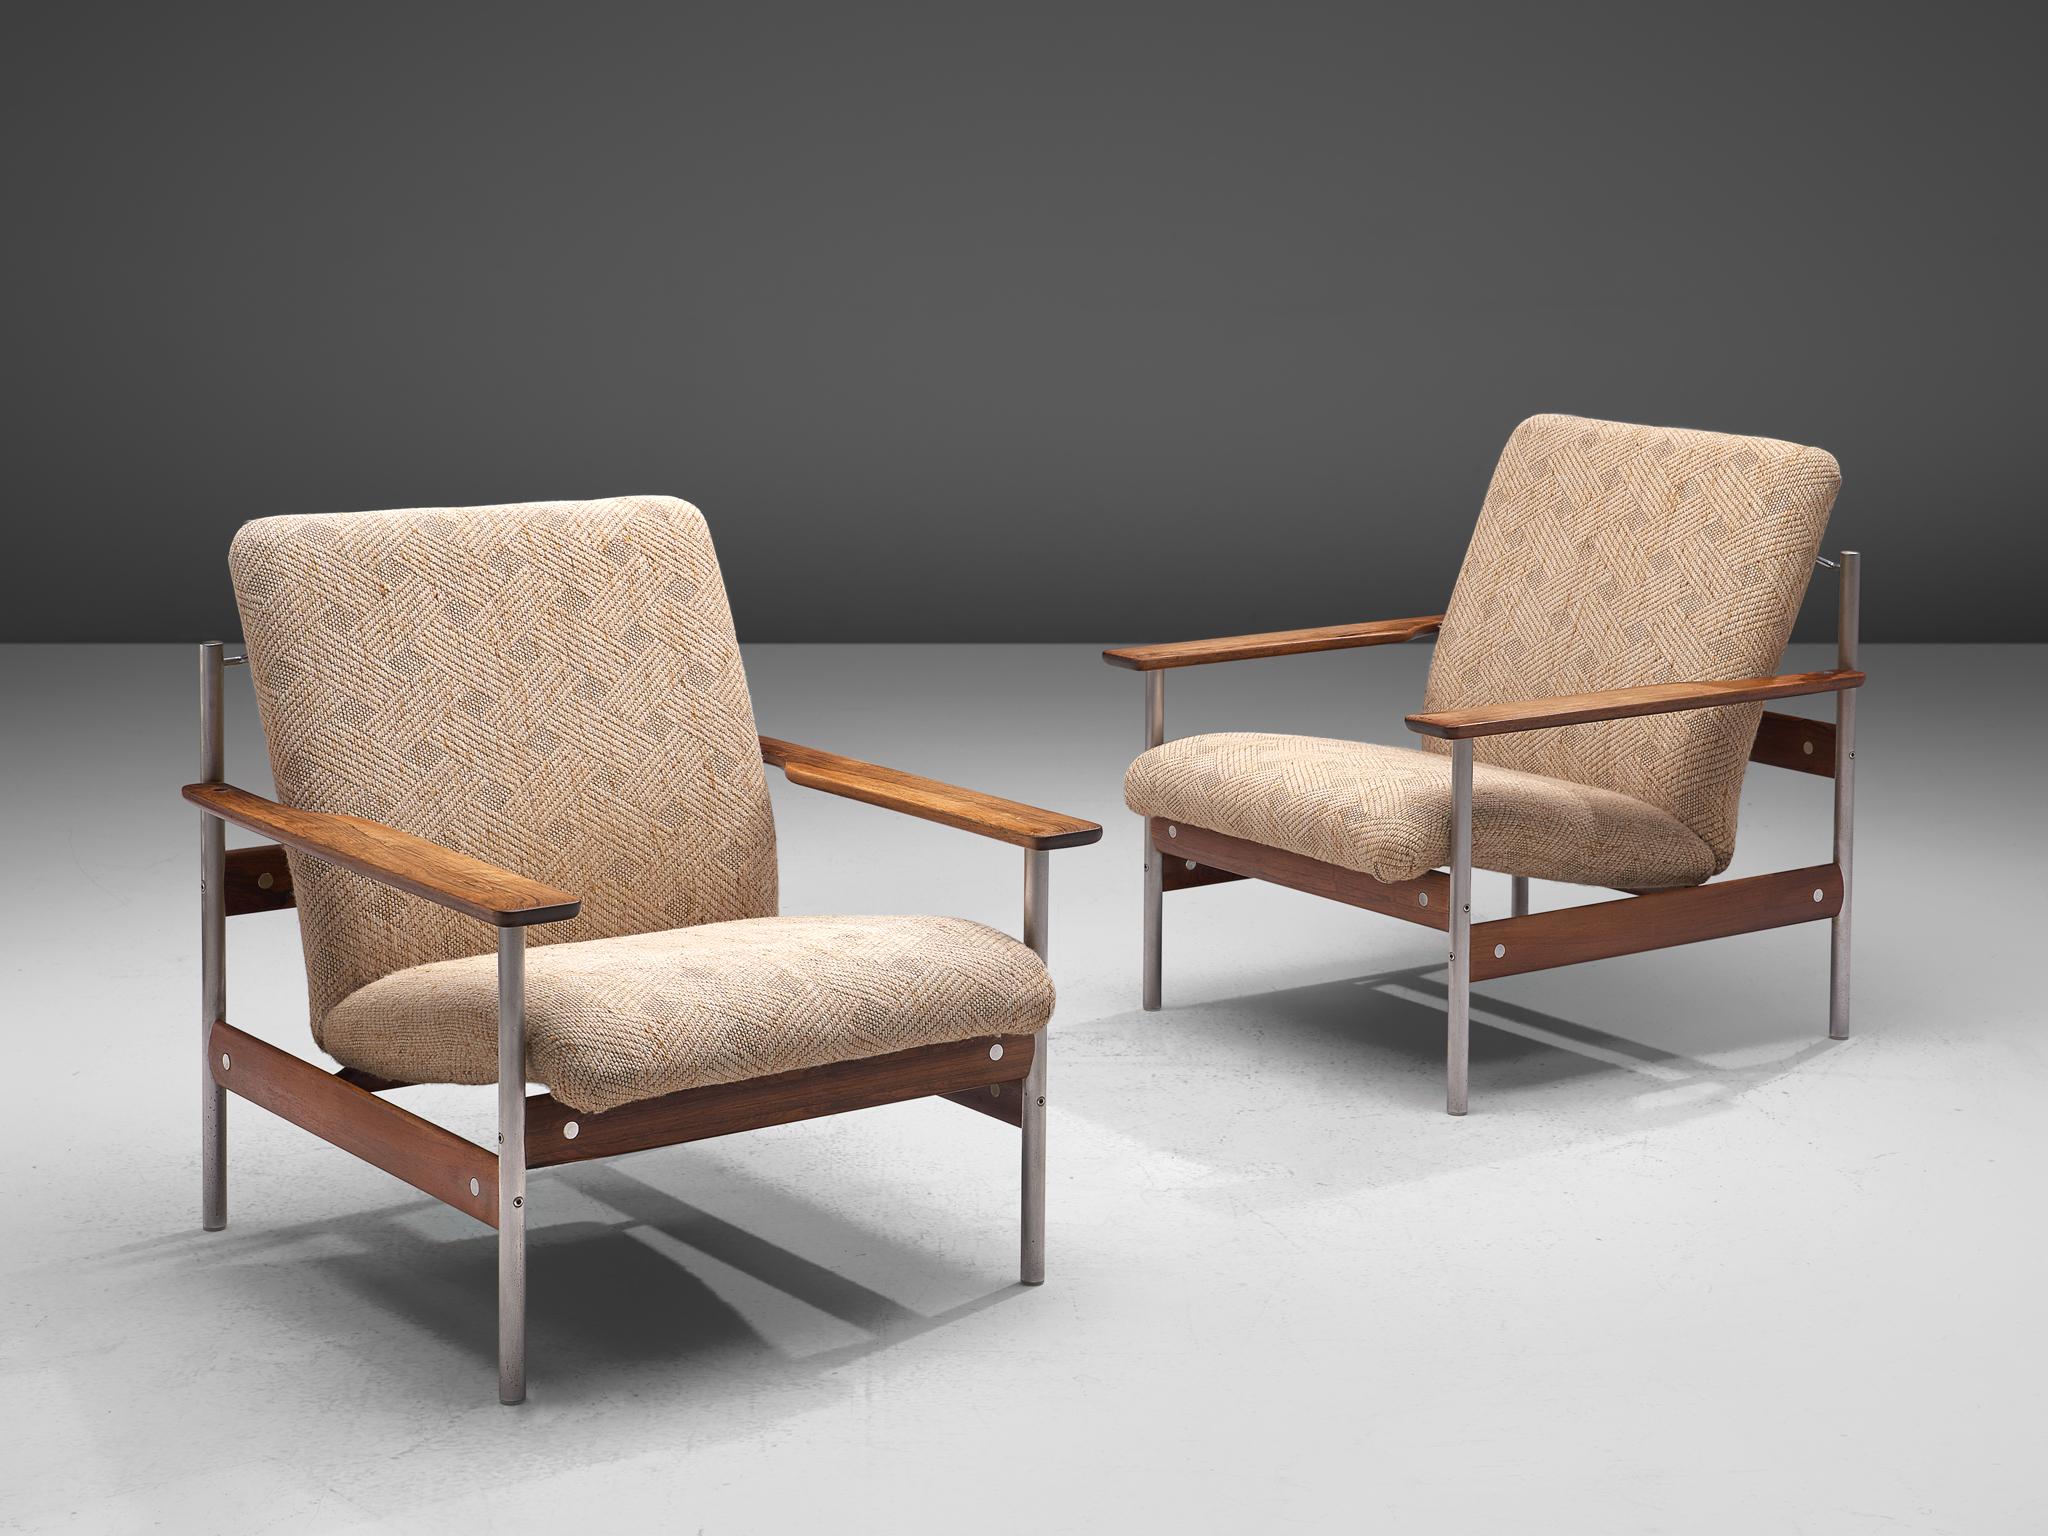 Sven Ivar Dysthe for Dokke Møbler, fabric, rosewood and steel, Norway, 1959.

This set of lounge chairs is designed by Sven Ivar Dysthe for Dokke Møbler. The frame of these armchairs is executed in rosewood and the legs are made out of stainless